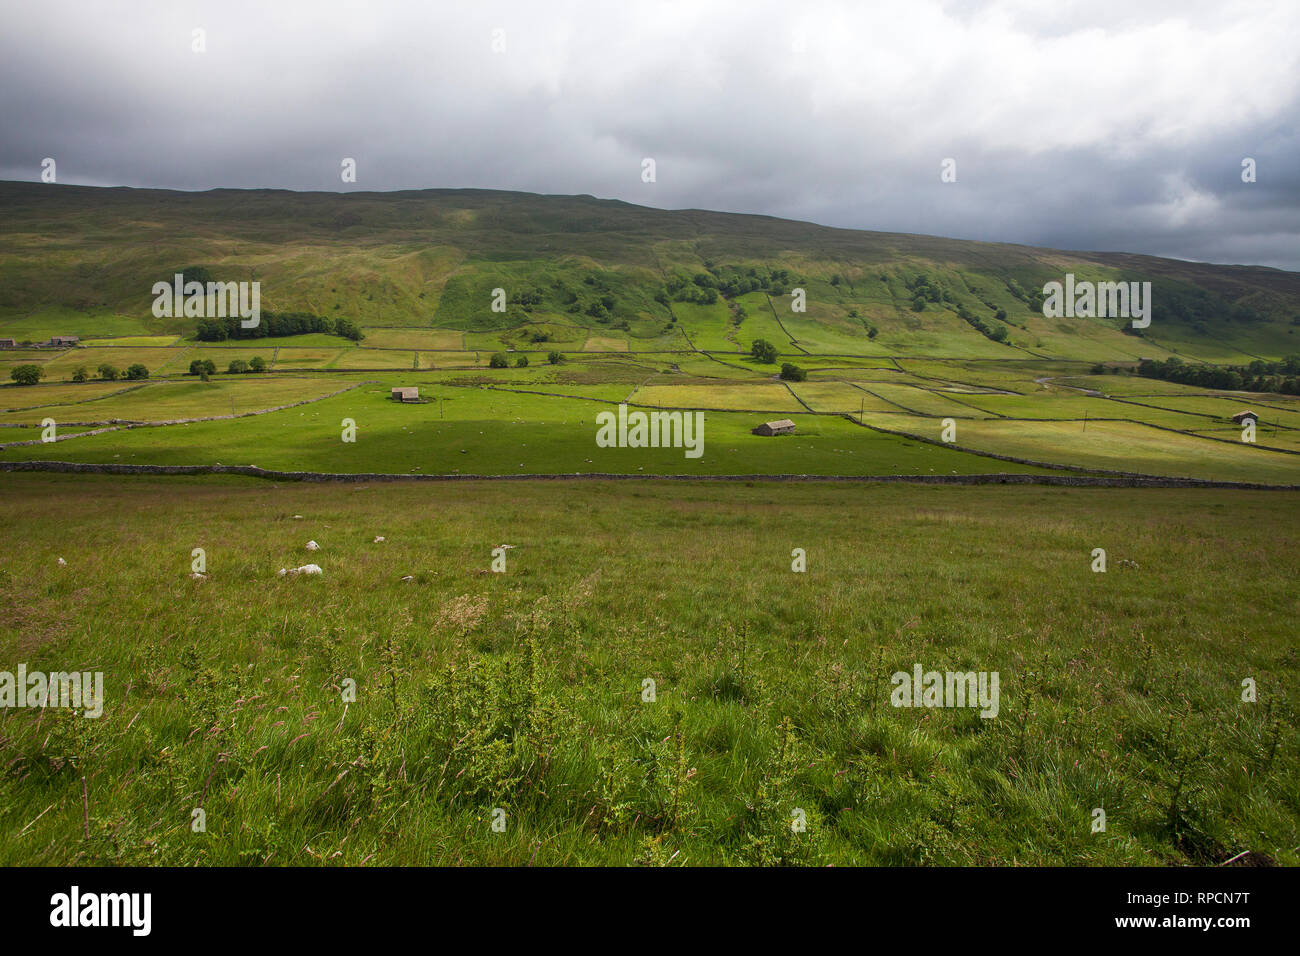 Old stone barns and meadows near Halton Gill Littondale Yorkshire Dales National Park Yorkshire England UK July 2016 Stock Photo